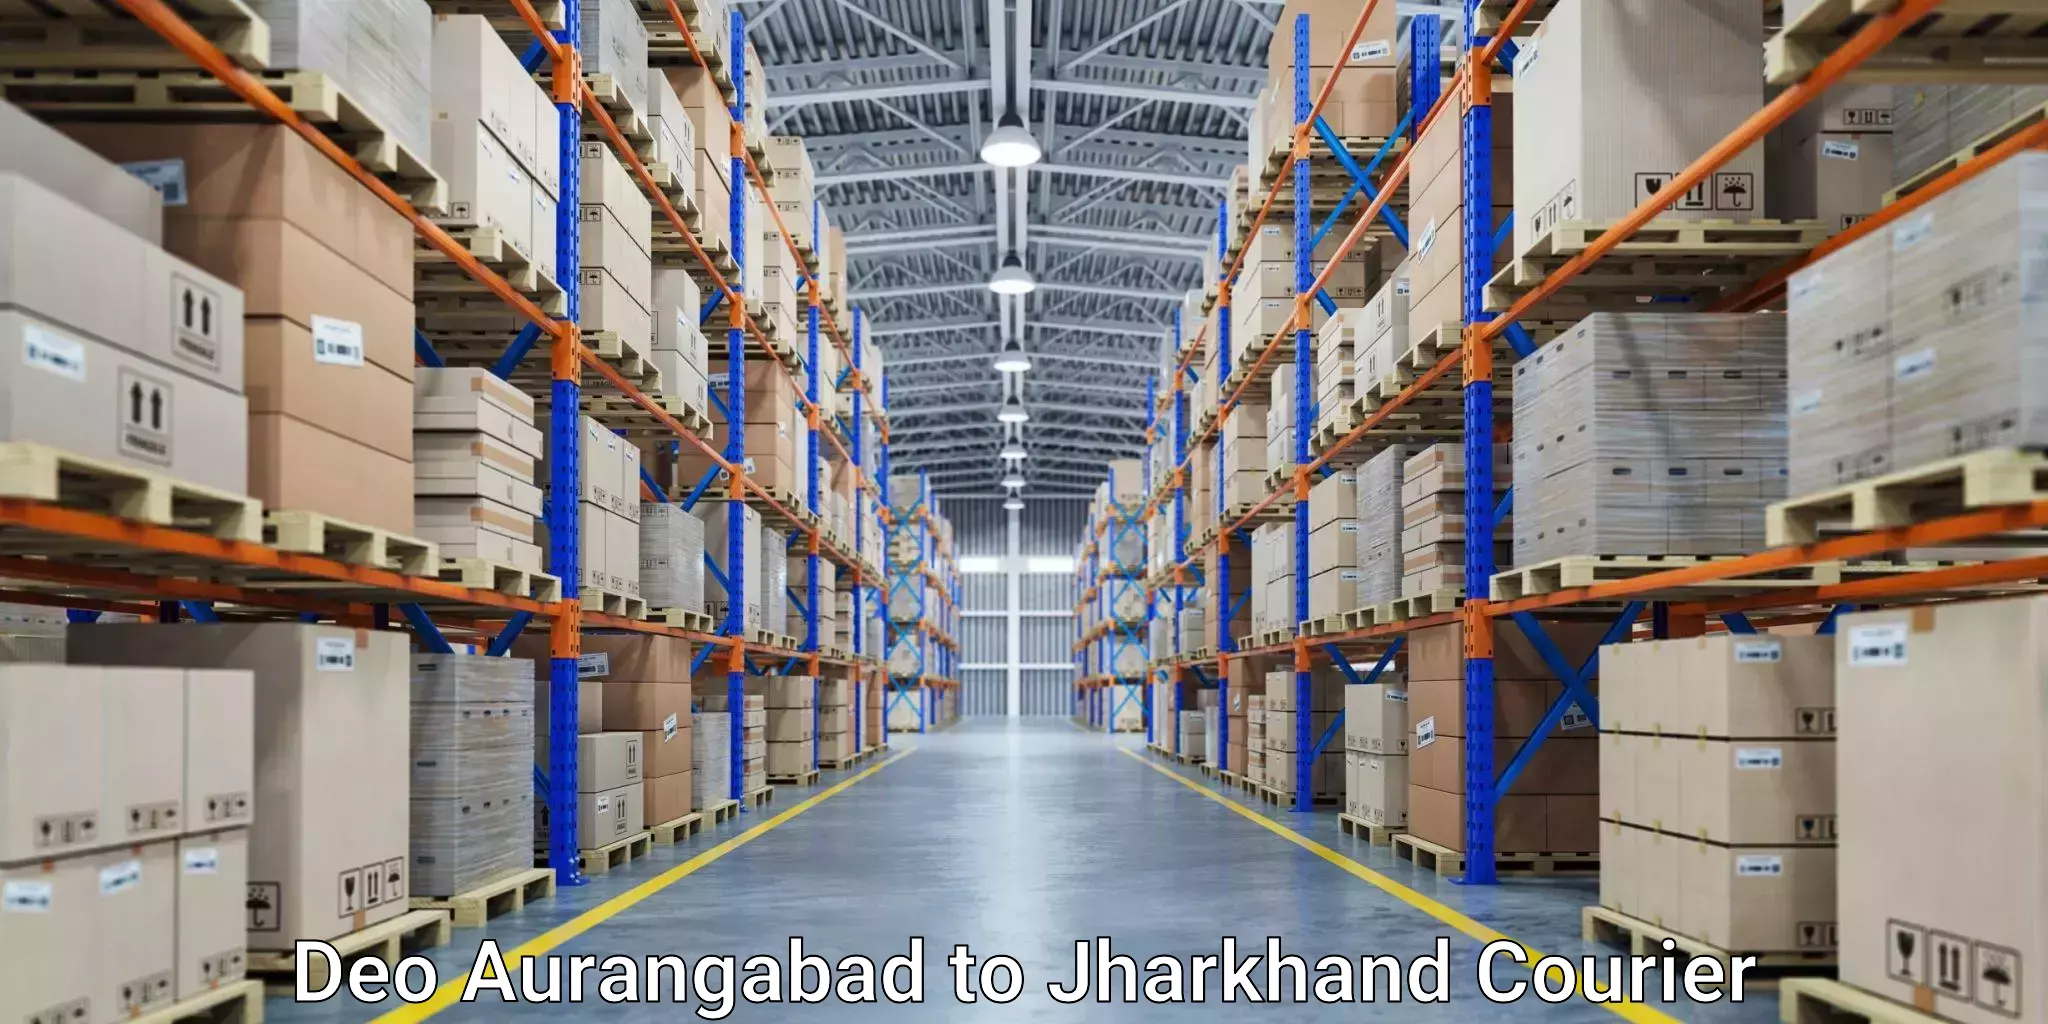 Supply chain delivery Deo Aurangabad to Jharia